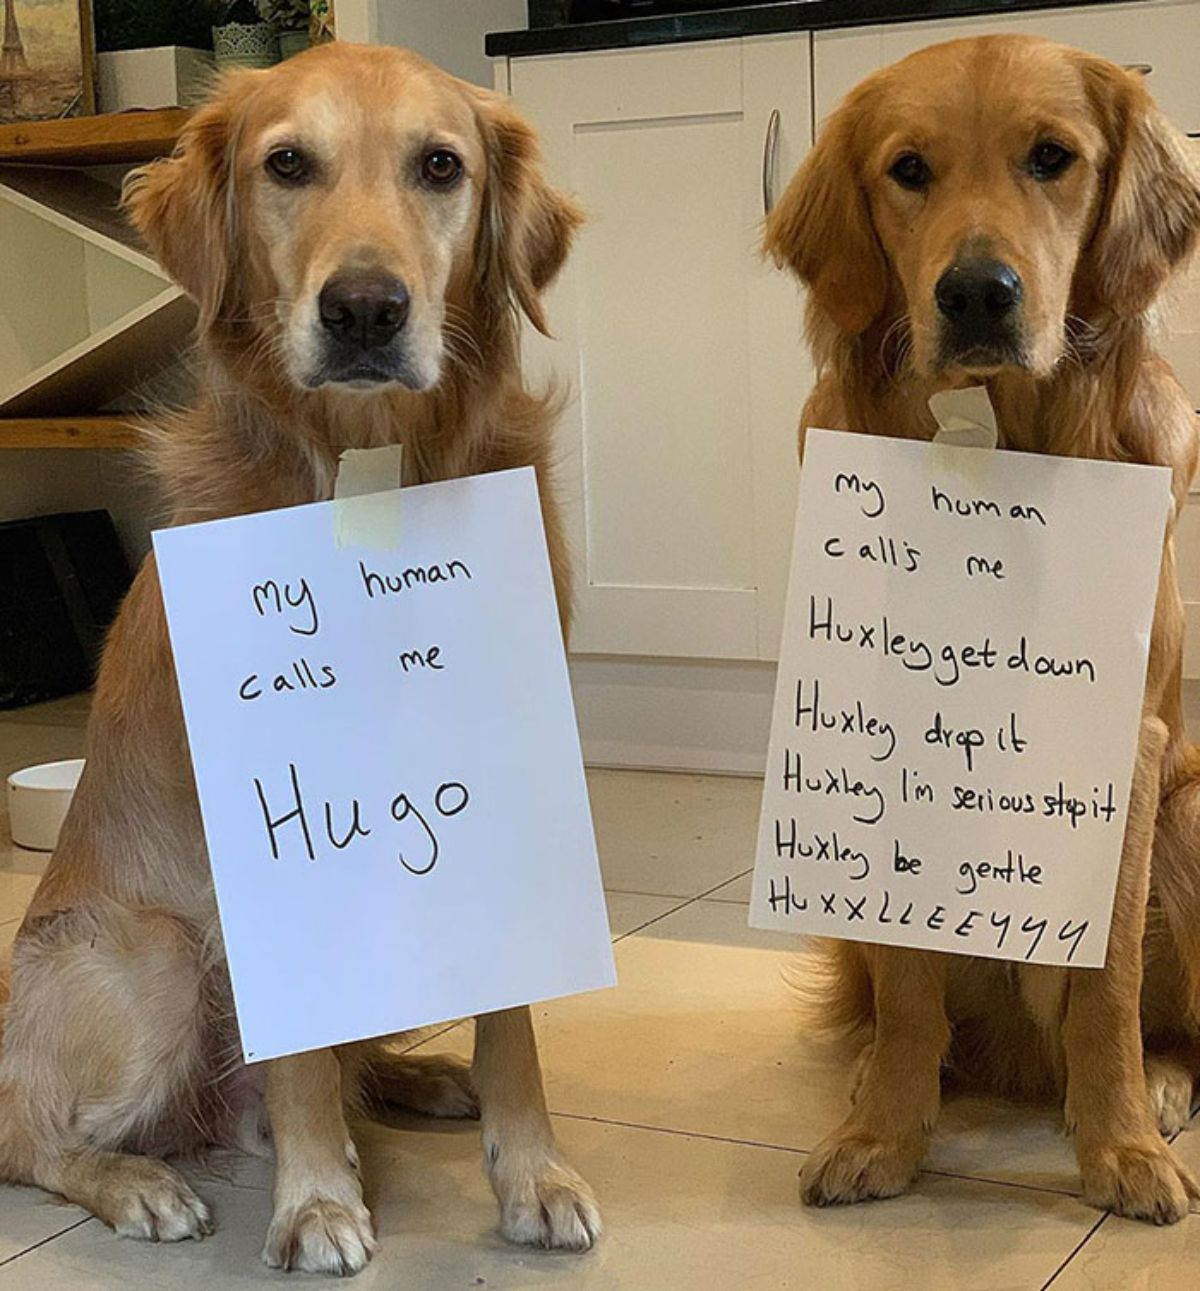 2 golden retrievers sitting on the floor with one dog's note saying "they call me hugo" and the other one's saying the dog is called "huxley get down" "huxley stop it" "huxley im serious stop it" "huxley be gentle" and "huxxlleeyyyy"